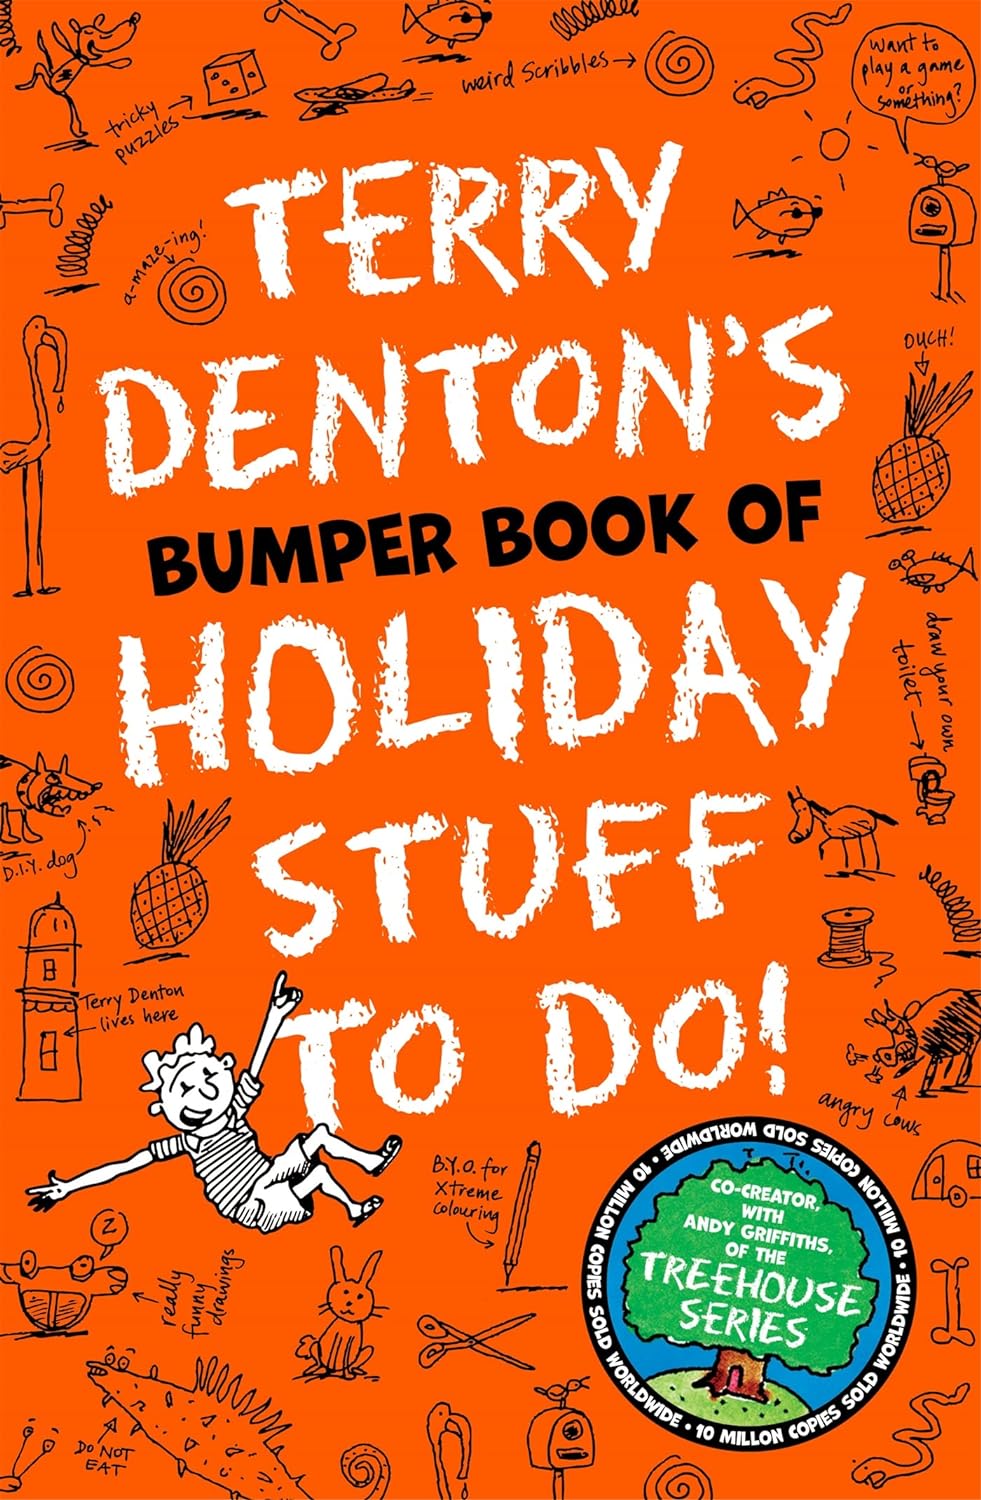 Terry Denton`S Bumper Book Of Holiday Stuff To Do! - Paperback